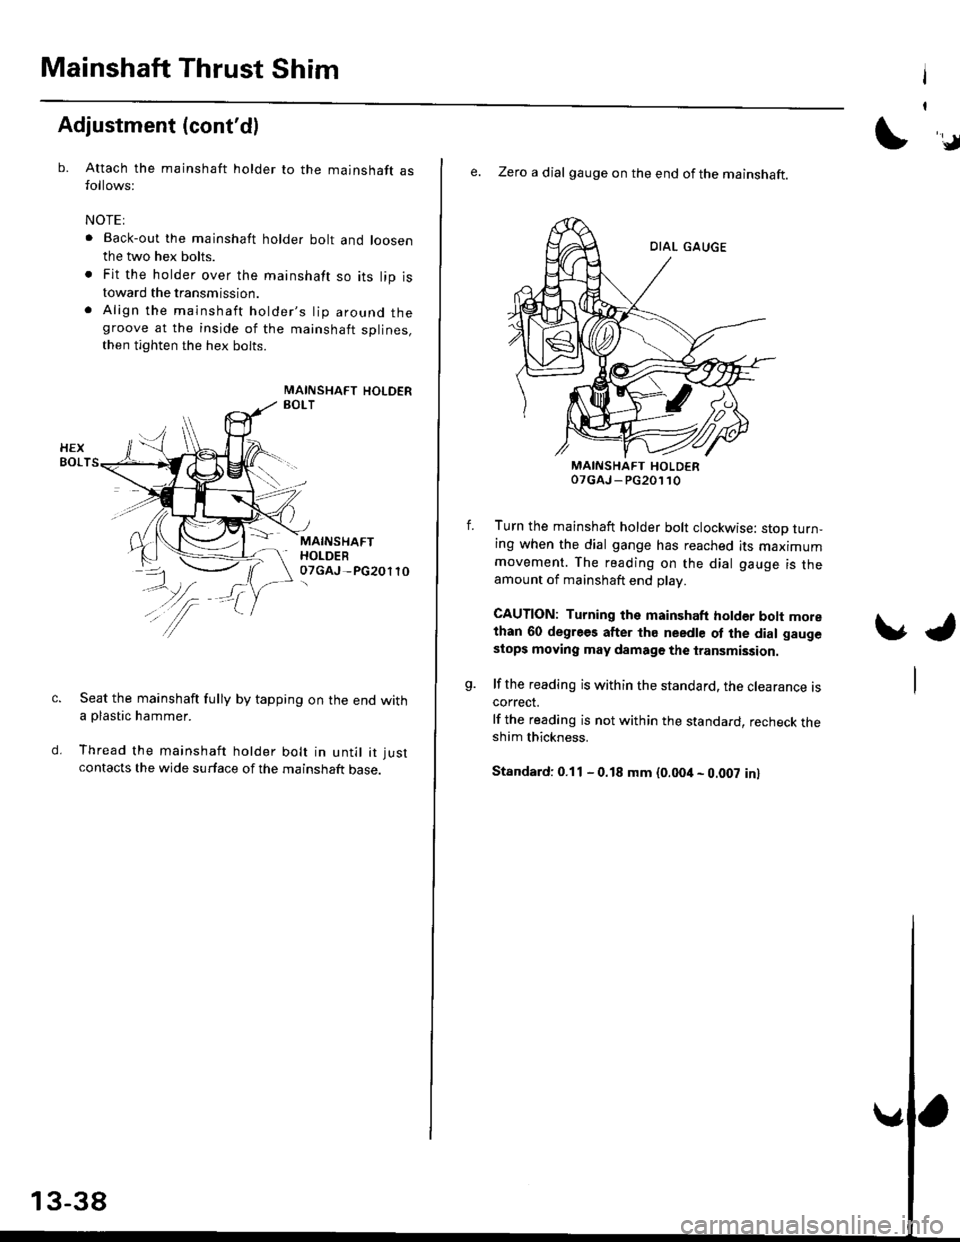 HONDA CIVIC 1999 6.G Workshop Manual Mainshaft Thrust ShimI
I
Adjustment (contdl
b.Attach the mainshaft holder to the mainshaft asfollows:
NOTEI
. Back-out the mainshaft holder bolt and loosen
the two hex bolts.
. Fit the holder over th